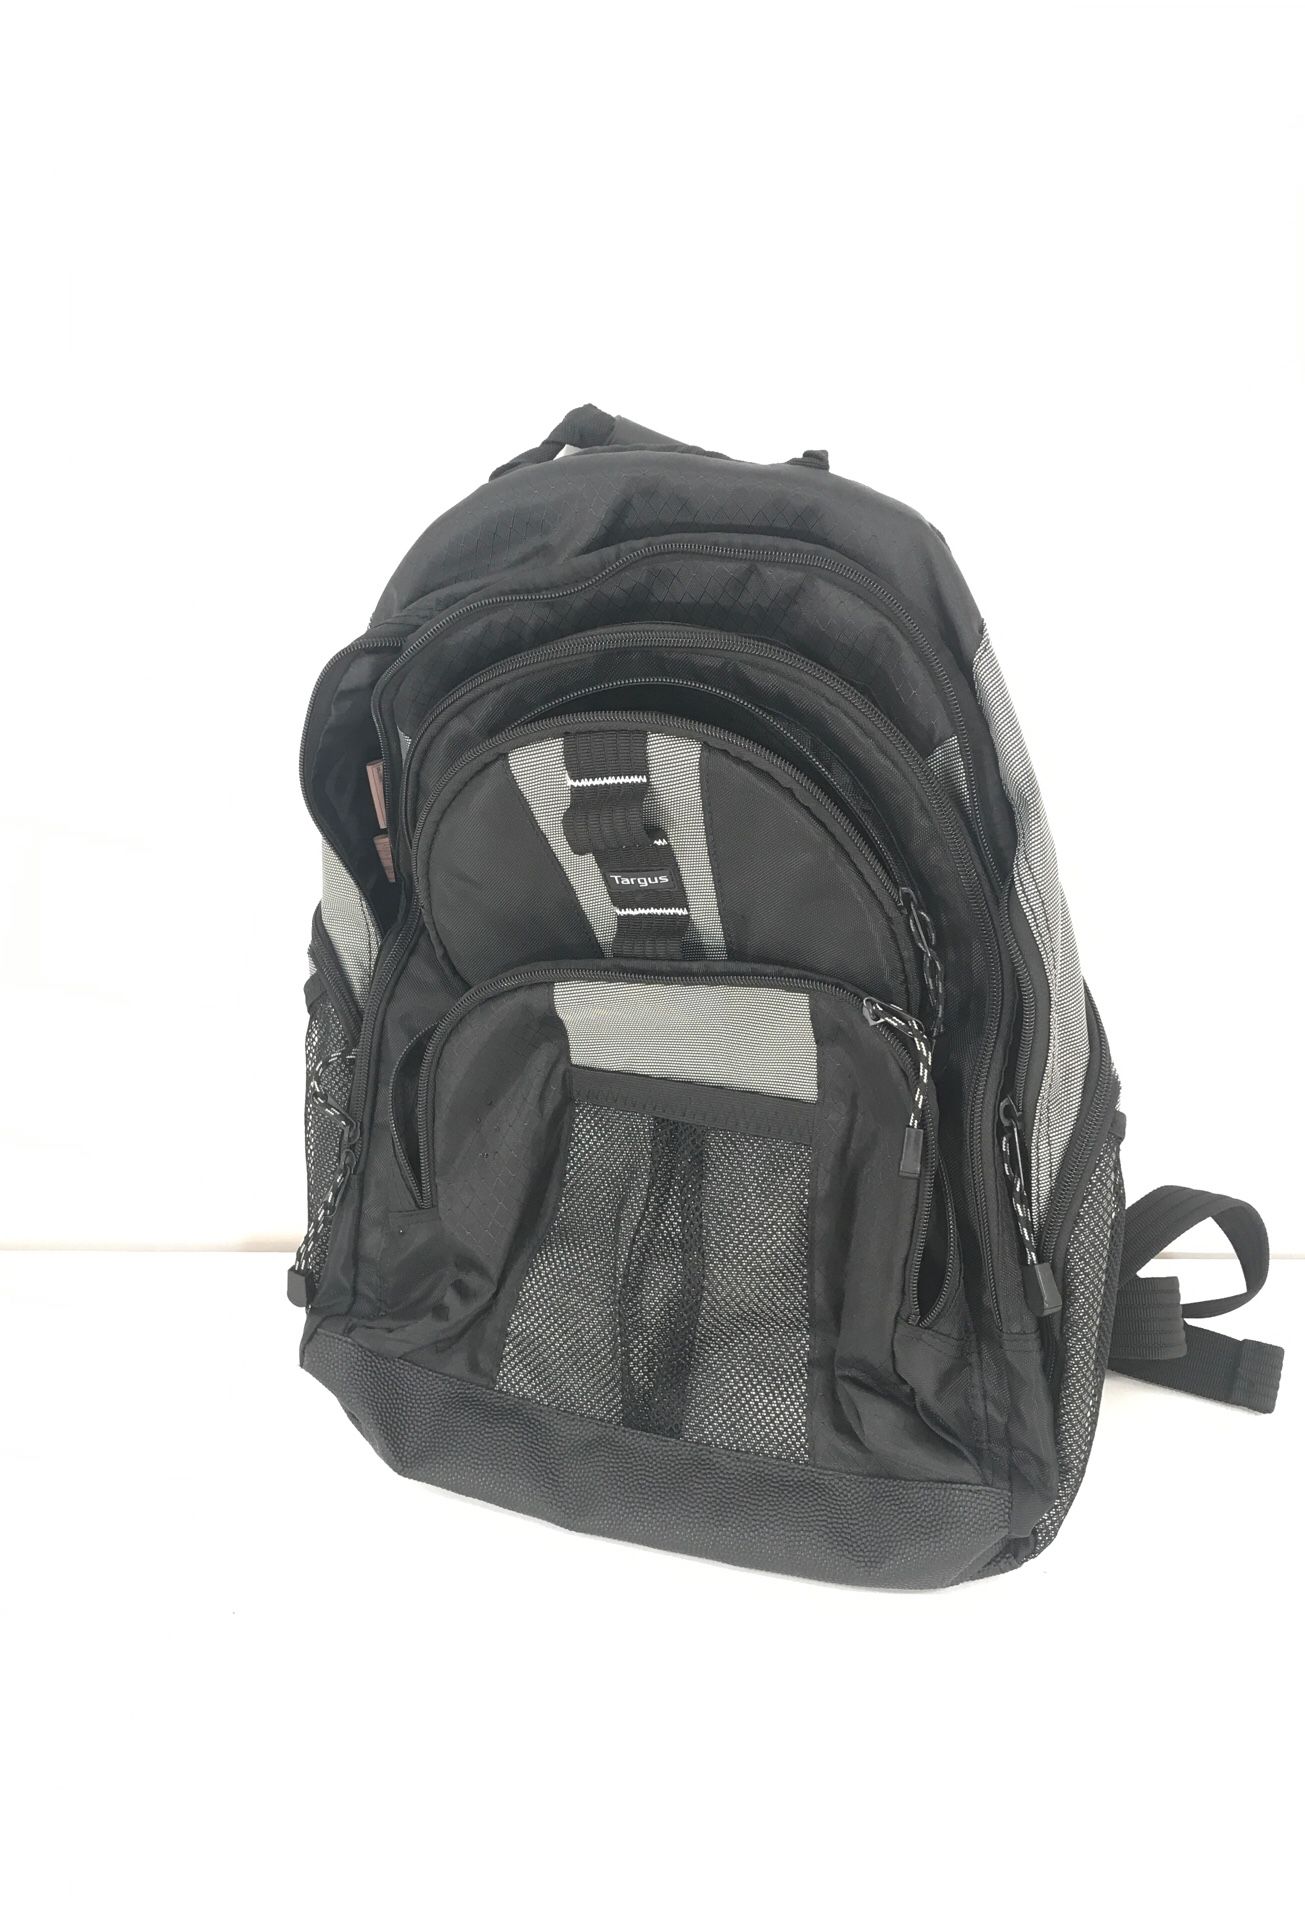 Backpack. Targus. One zipper broken see pix. Comes with laptop iPad pocket. Looks brand new